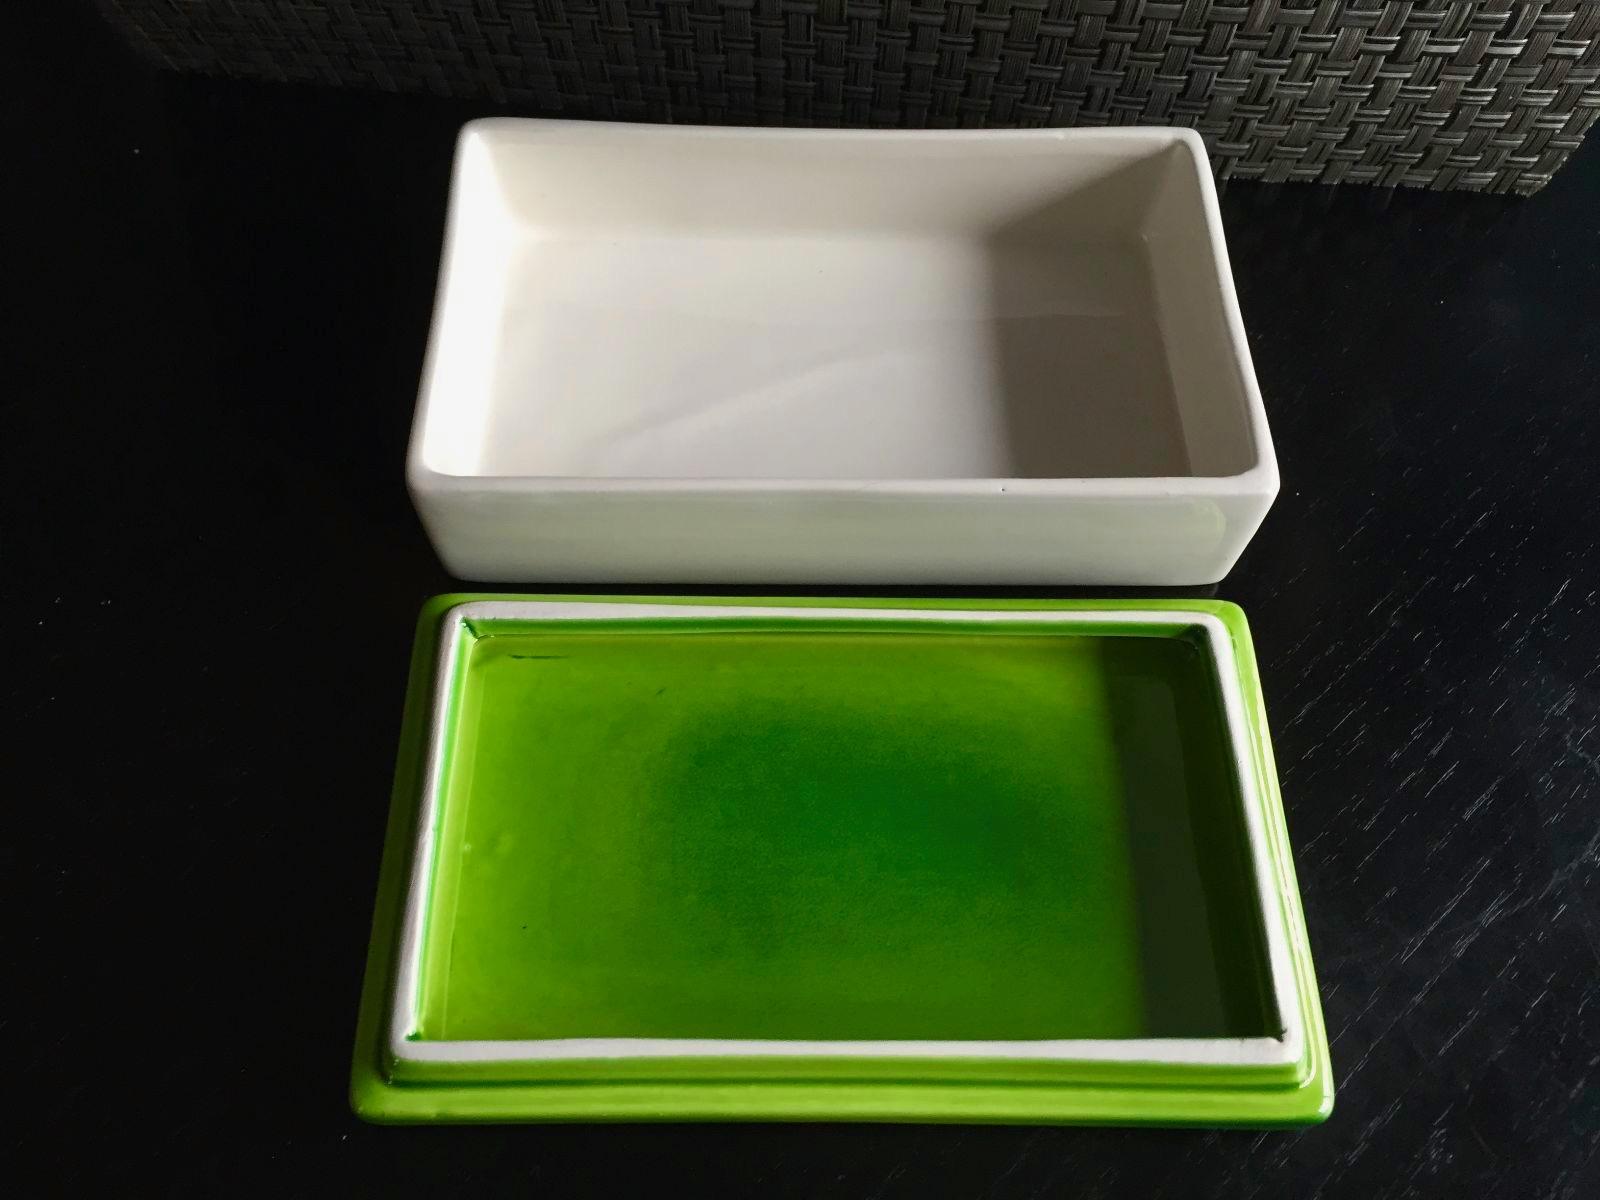 Classic Italian ceramic box by Raymor. Green lid with white tray. Great coloring. Very good vintage condition. Two matching boxes available. Priced individually. 

 